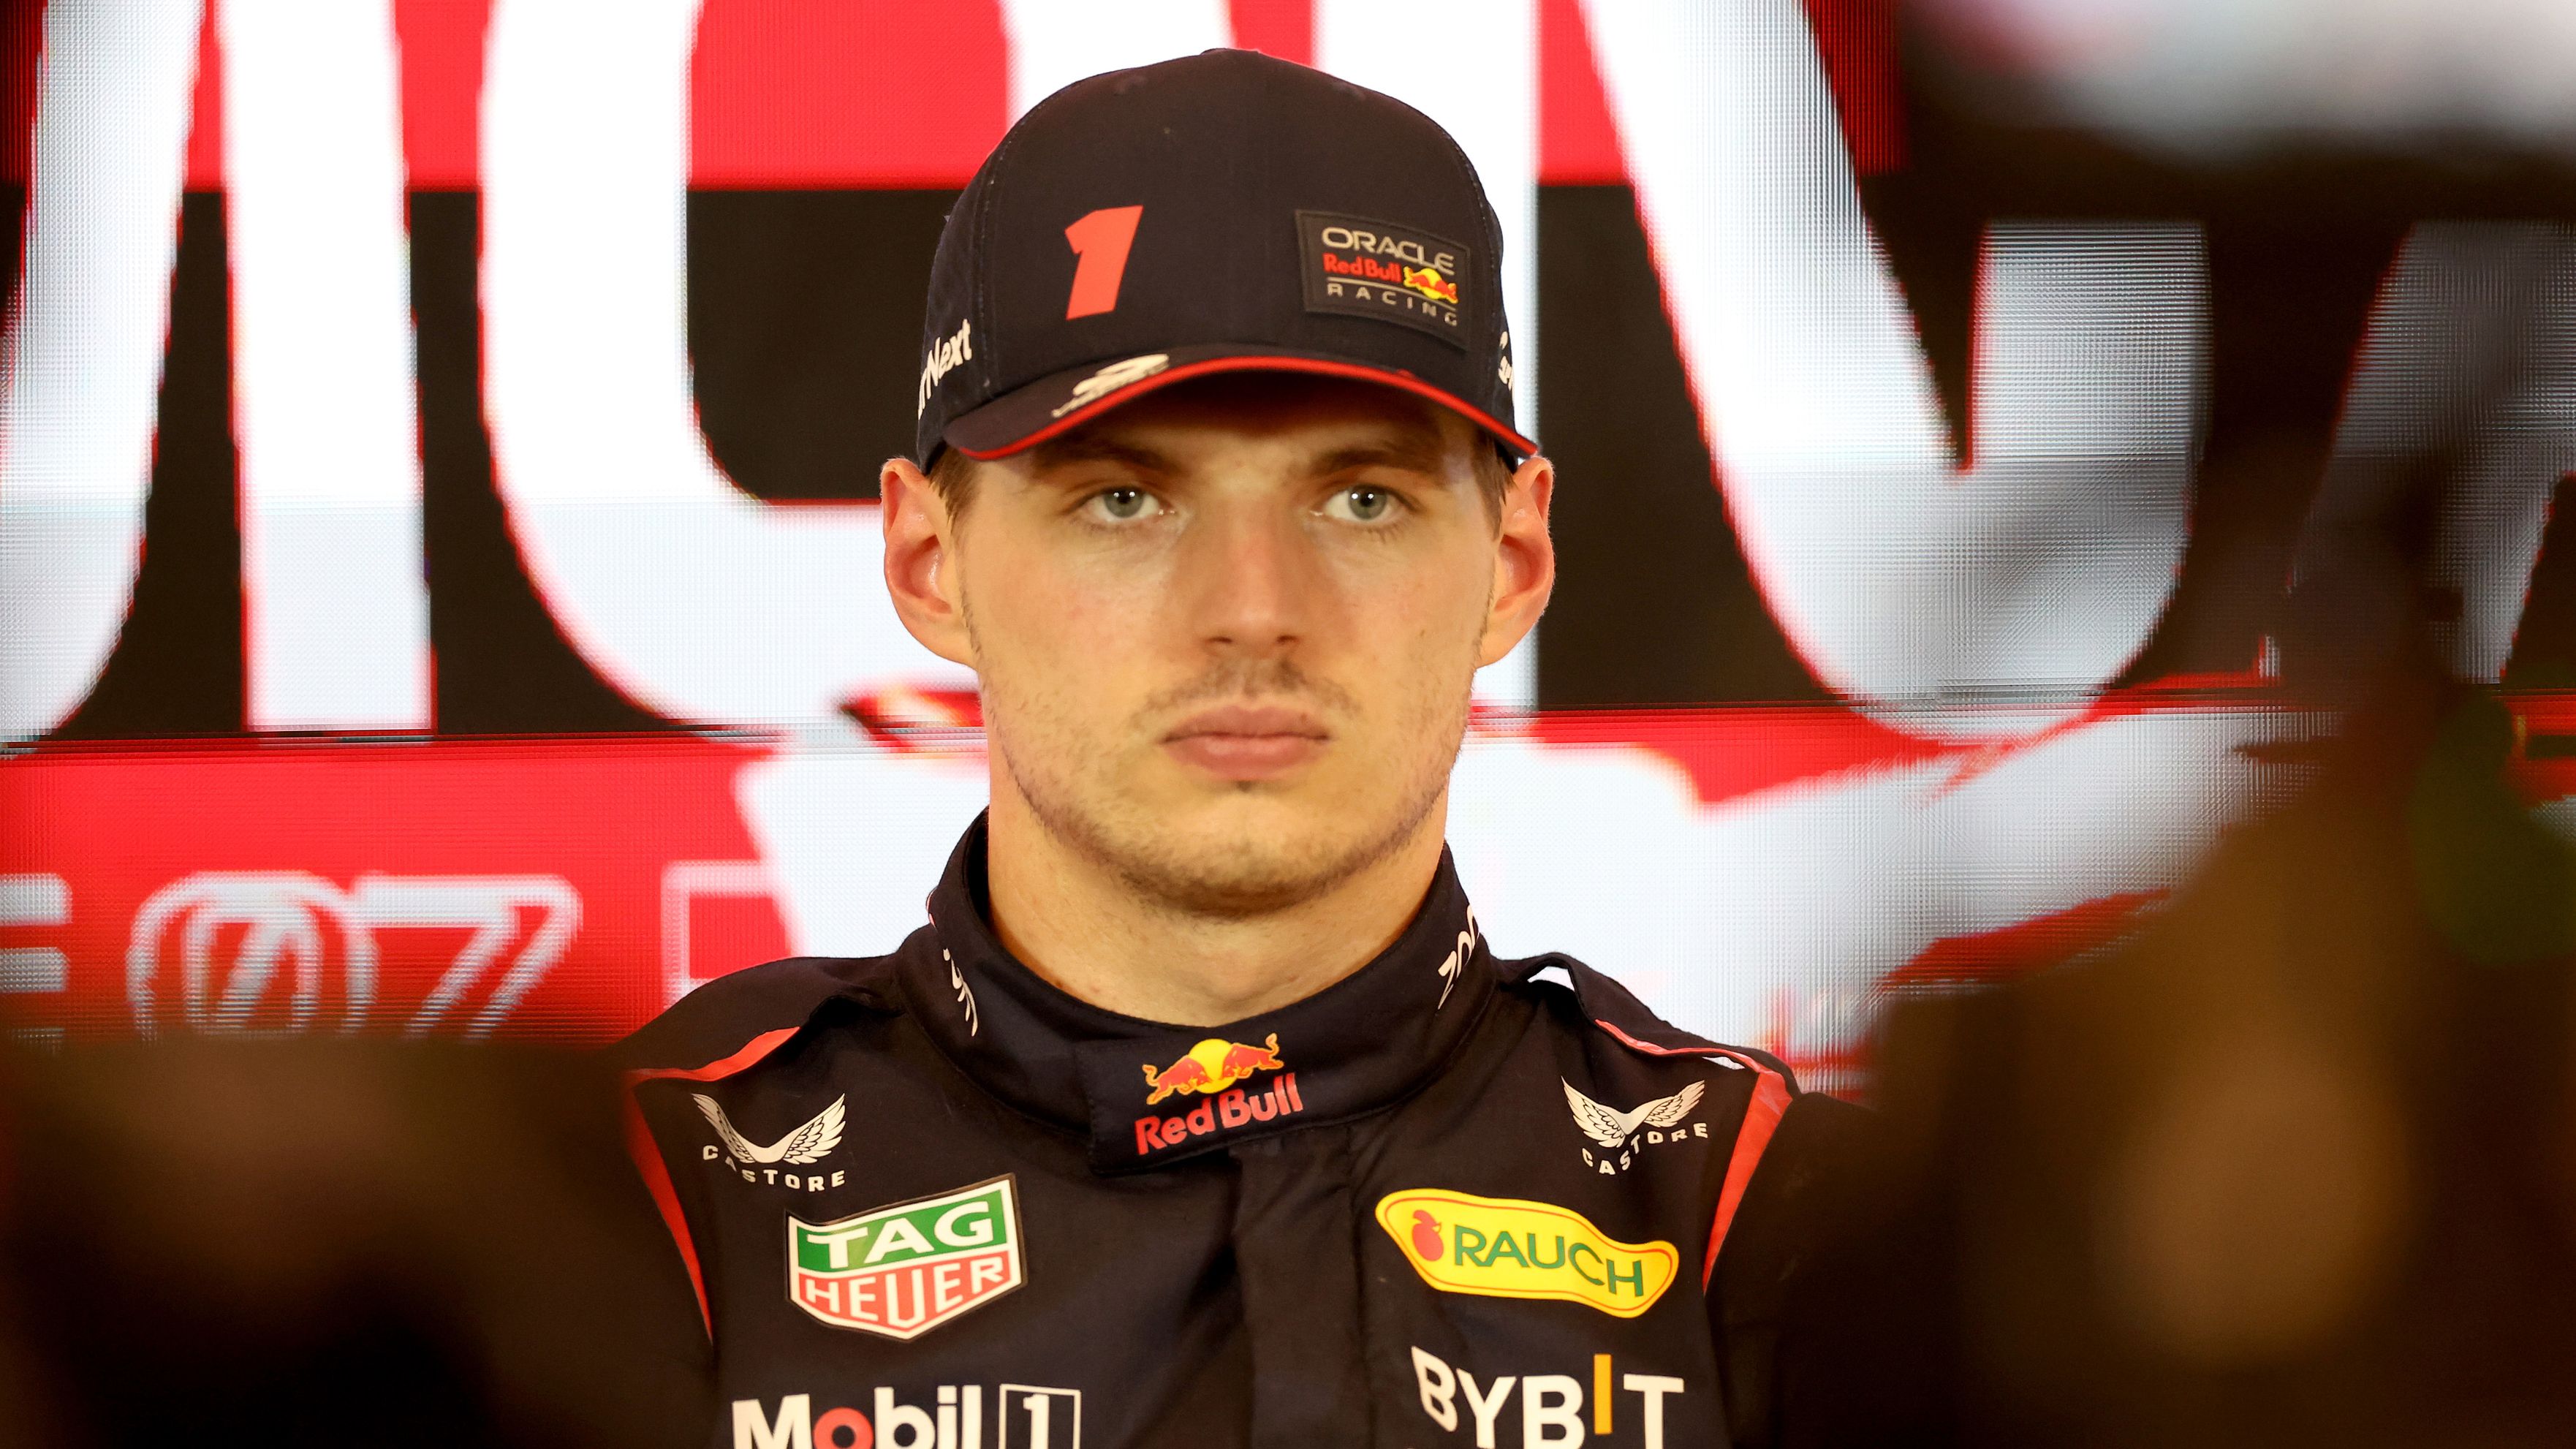 Max Verstappen speaks to media after qualifying at the Monaco Grand Prix.